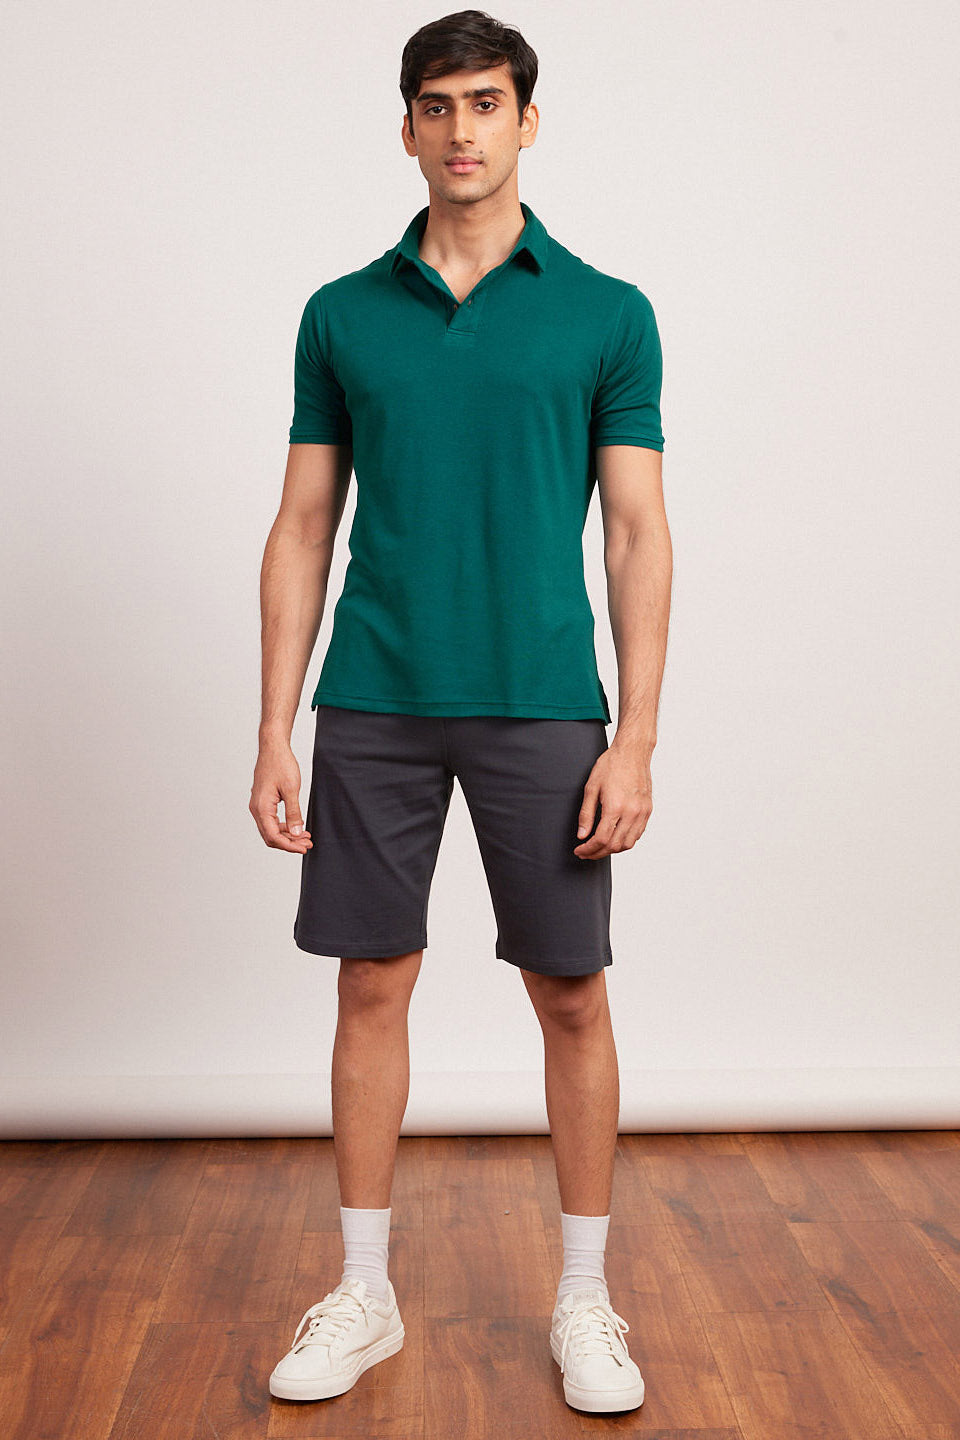  The Vintage Polo Marine Green  | Mens T-Shirts   |  Creatures of Habit